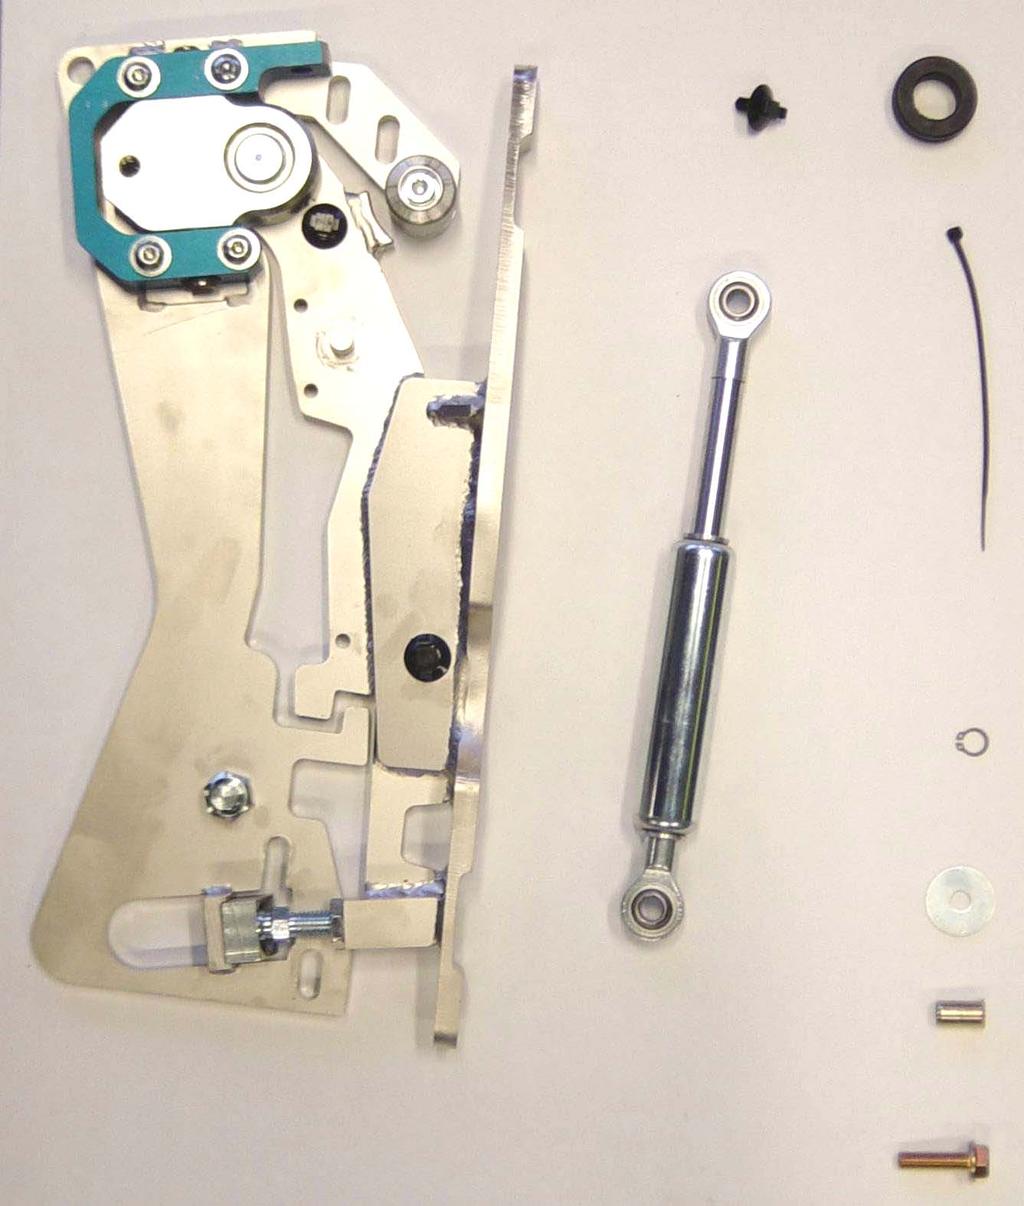 Overview LSD-door mounting/hinge: (per vehicle side) Swing arm to chassis plate adjustable connection mount with horizontal door gab adjuster A1 B A 3 x Cable clips + 1 x Grommet Outward motion door